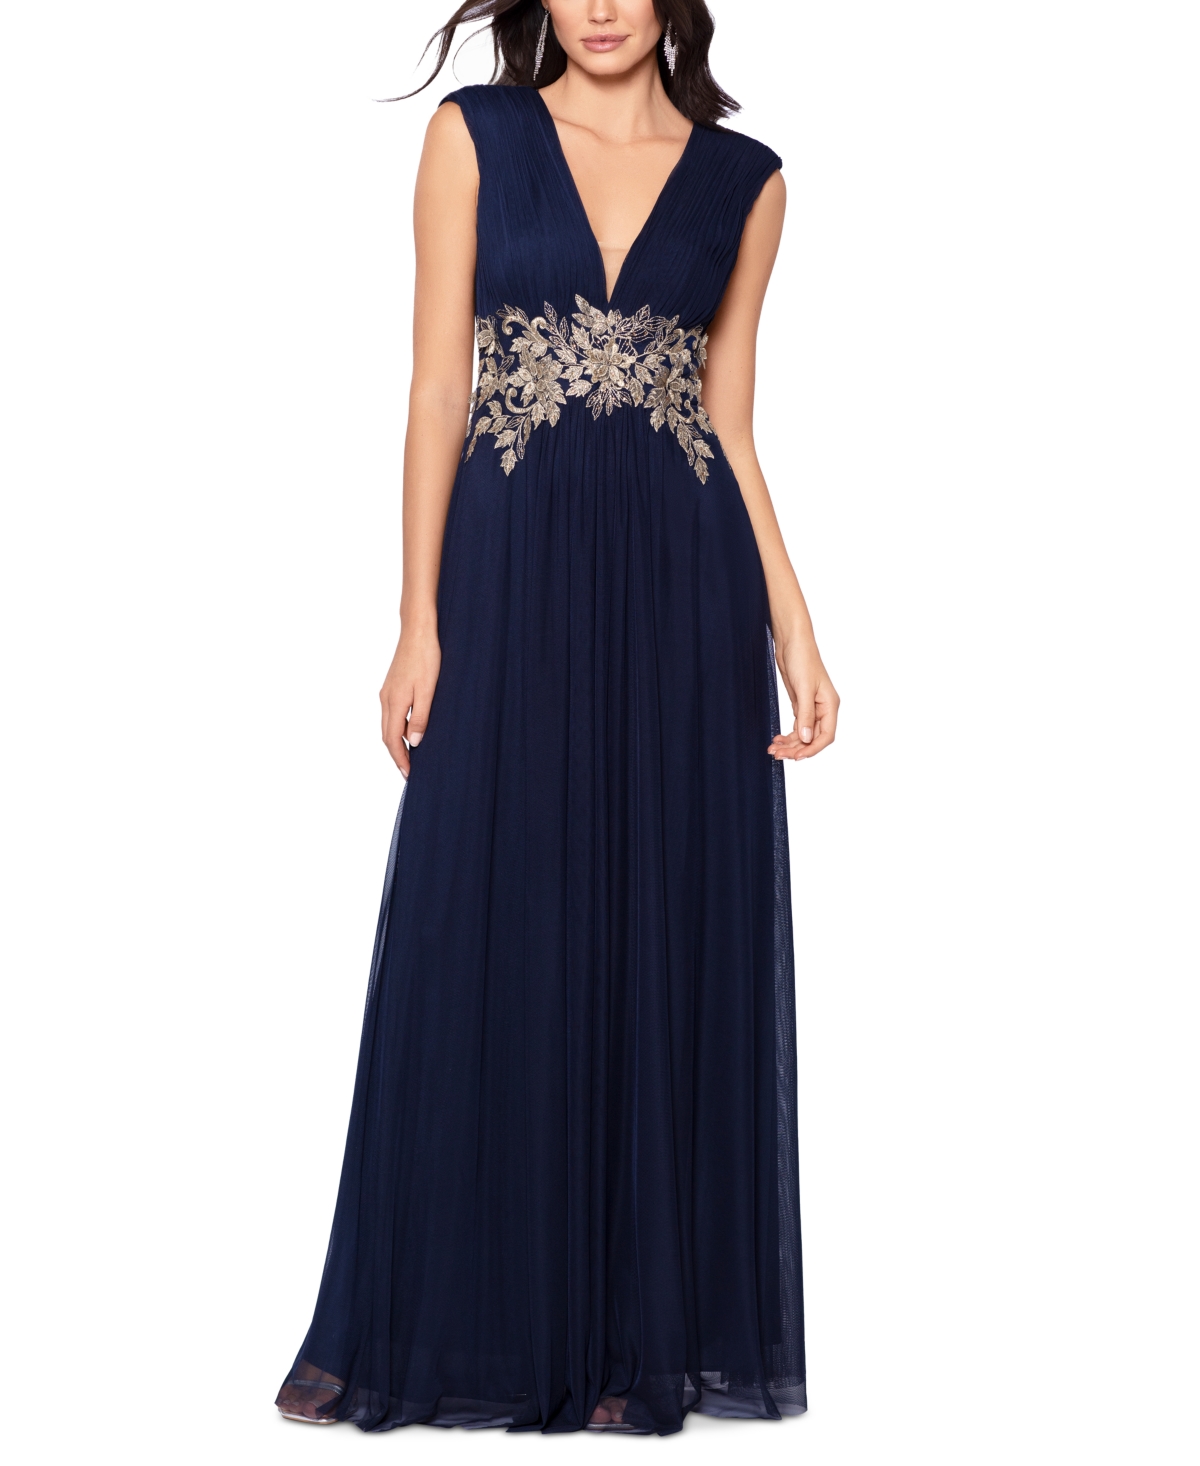 Women's Embroidered V-Neck Gown - Navy Gold